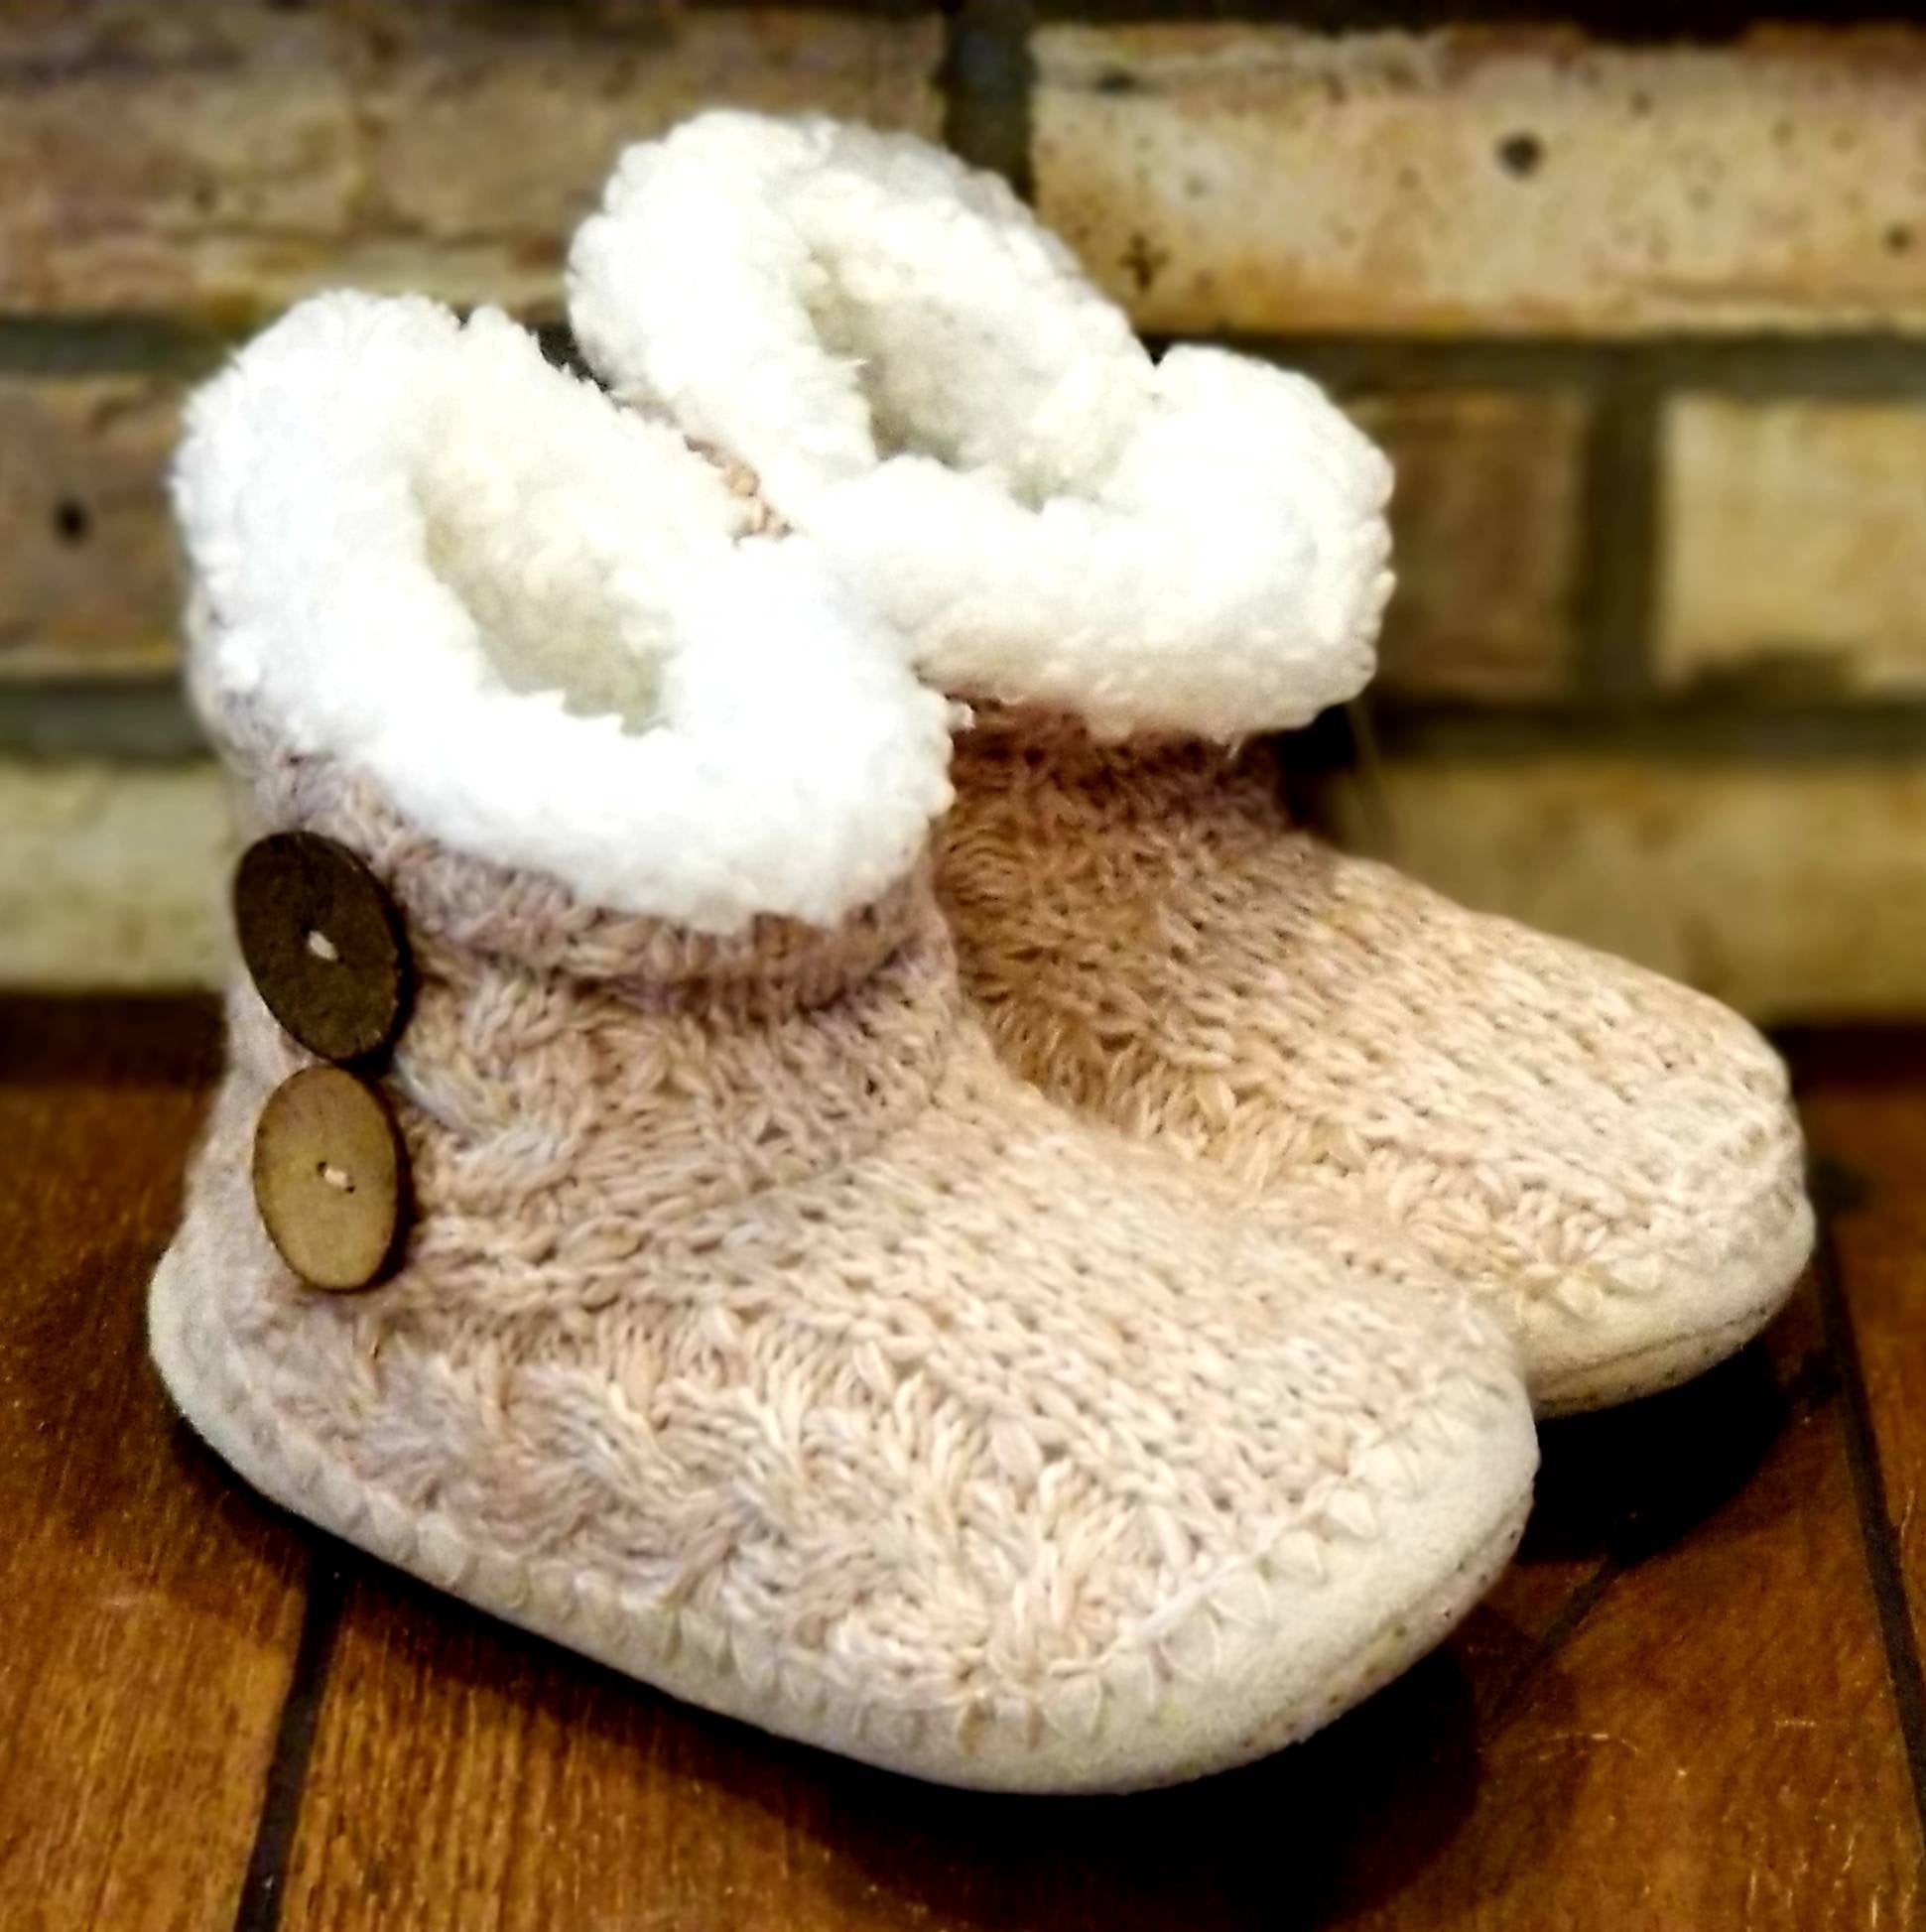 Monogrammed Sherpa Lined Slippers